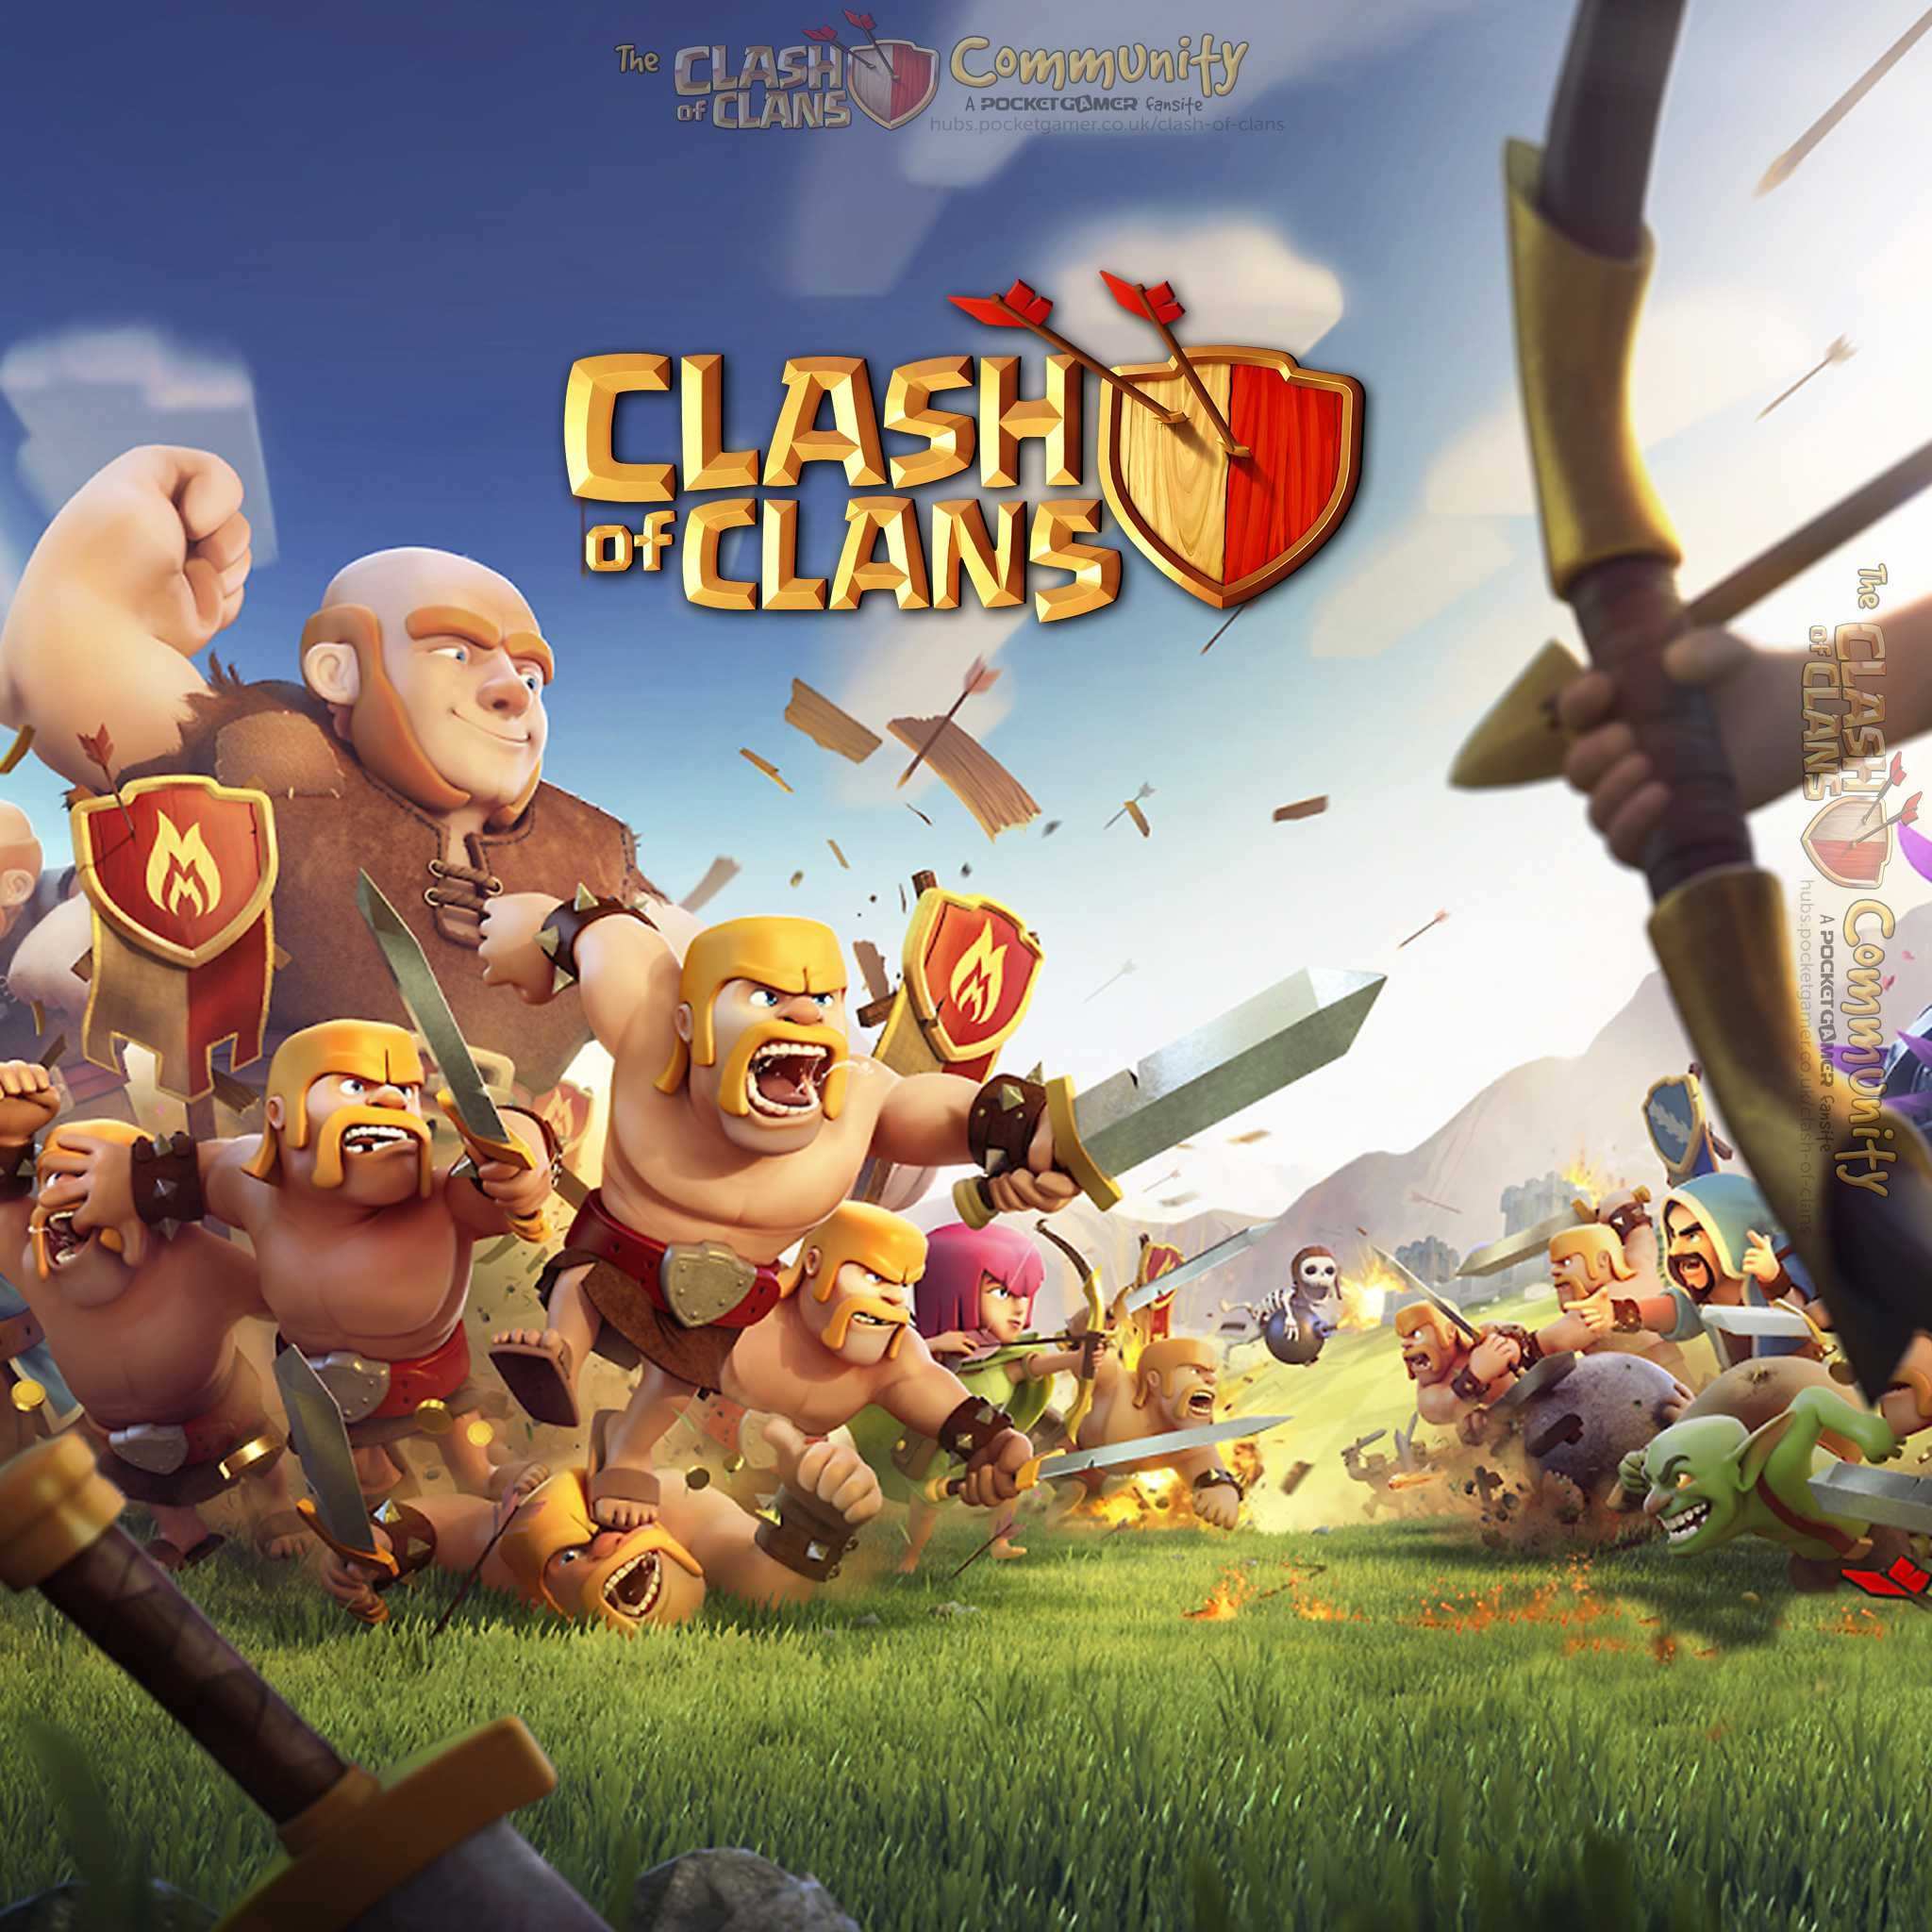 wallpaper coc keren,animated cartoon,action adventure game,games,strategy video game,pc game